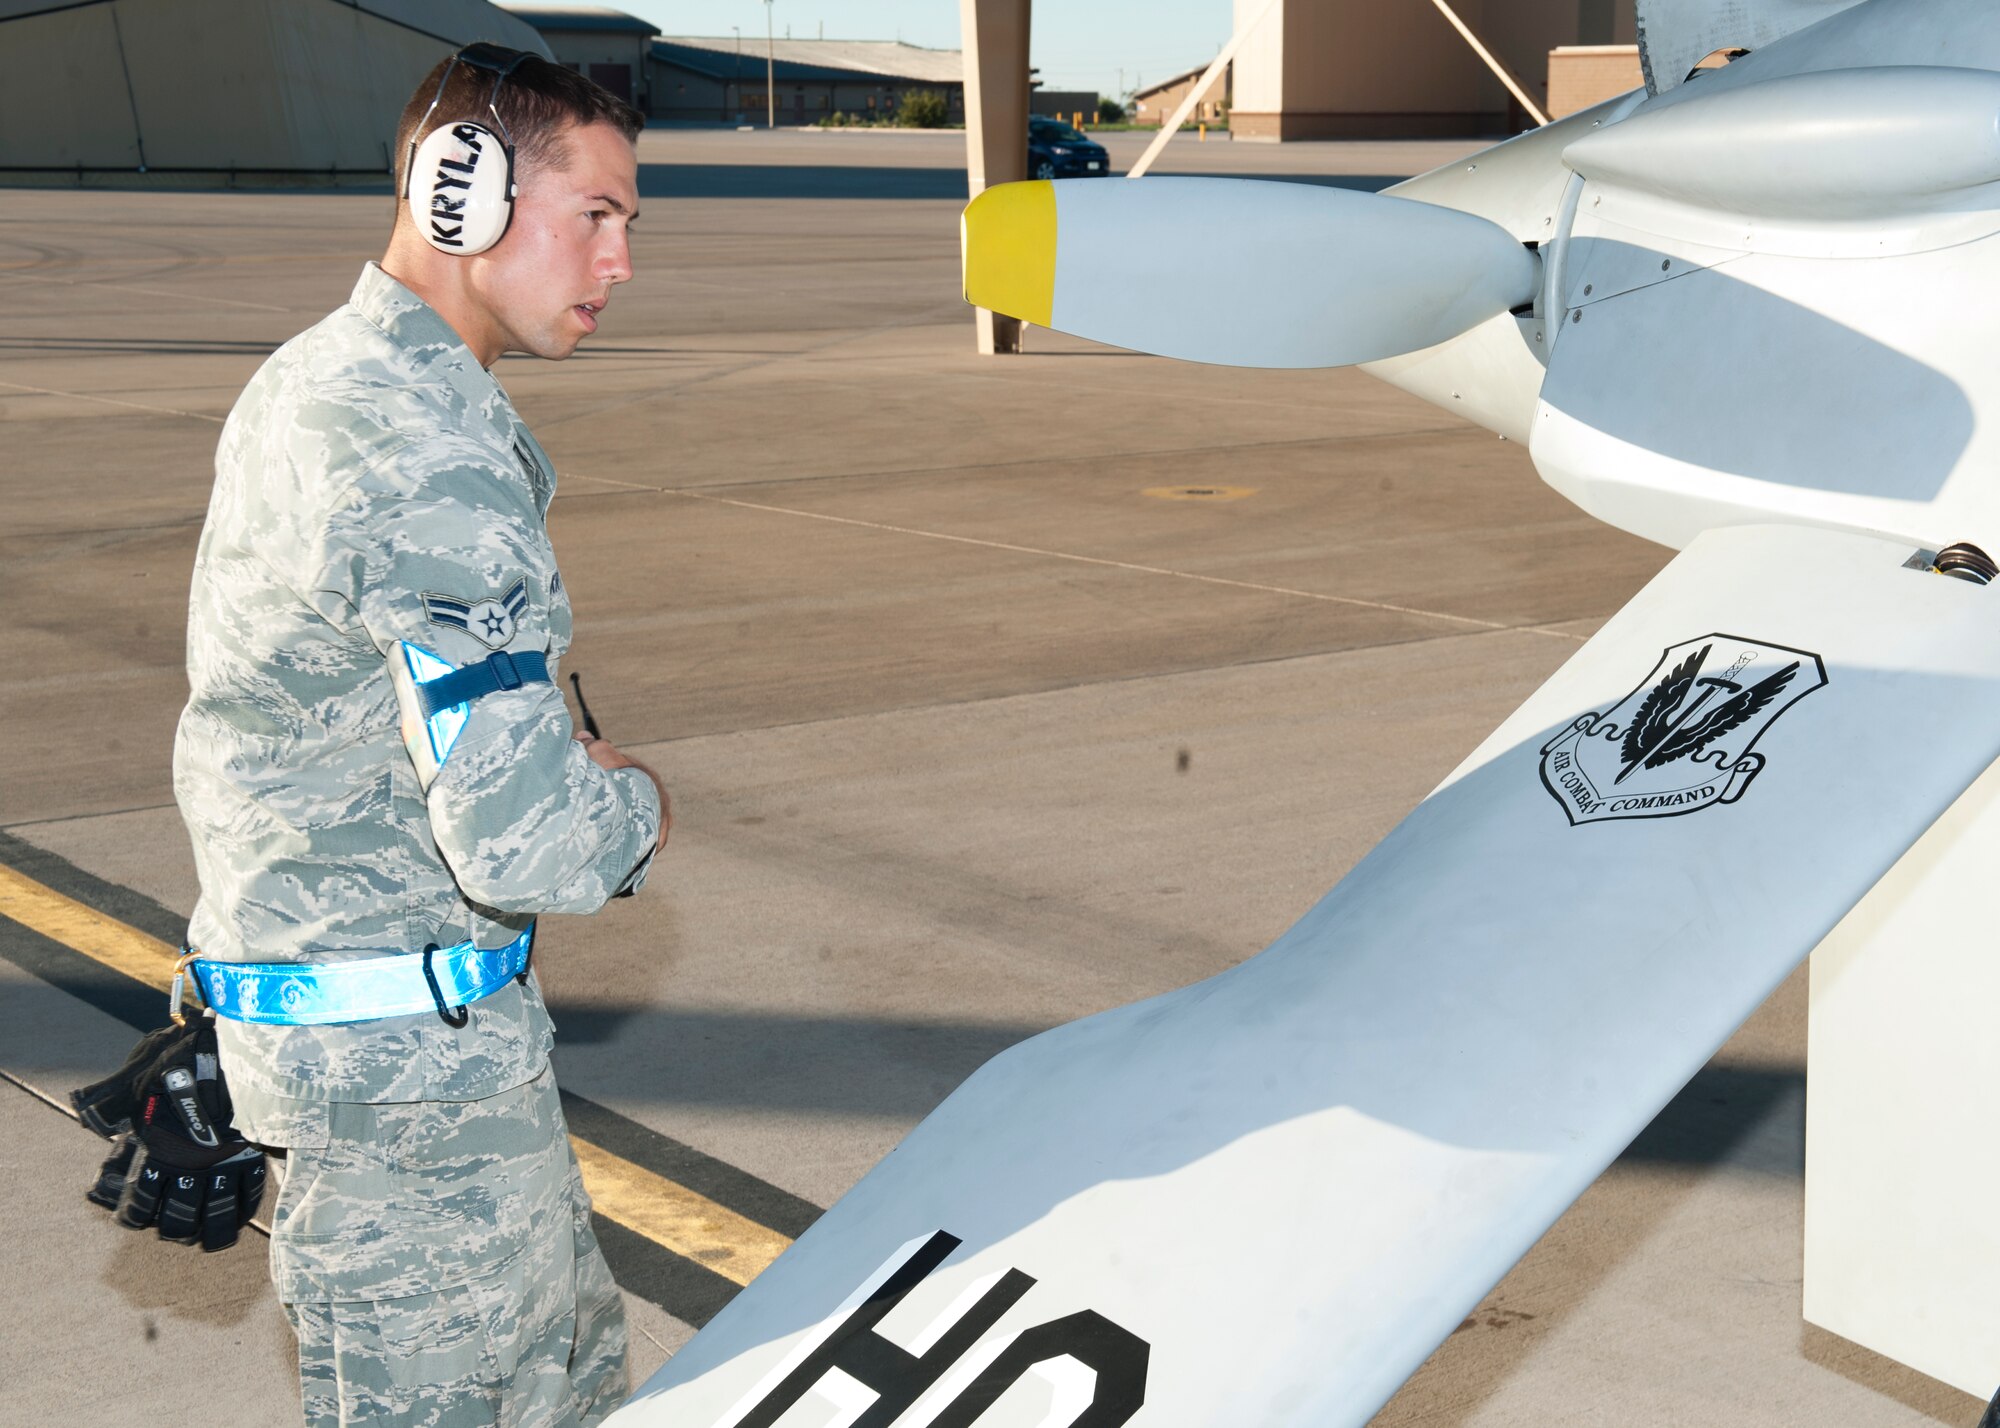 Airman 1st Class Justin Kryla, 849th Aircraft Maintenance Squadron crew chief, performs functionality checks on an MQ-1 Predator at Holloman Air Force Base, N.M., Sept. 25. The Predator’s primary functions are to fulfill reconnaissance and forward observation roles.  In addition to the pilot and sensor operator who control the aircraft from a ground control station, flying an MQ-1 requires a culmination of efforts from various squadrons. (U.S. Air Force photo by Airman 1st Class Daniel E. Liddicoet/Released)